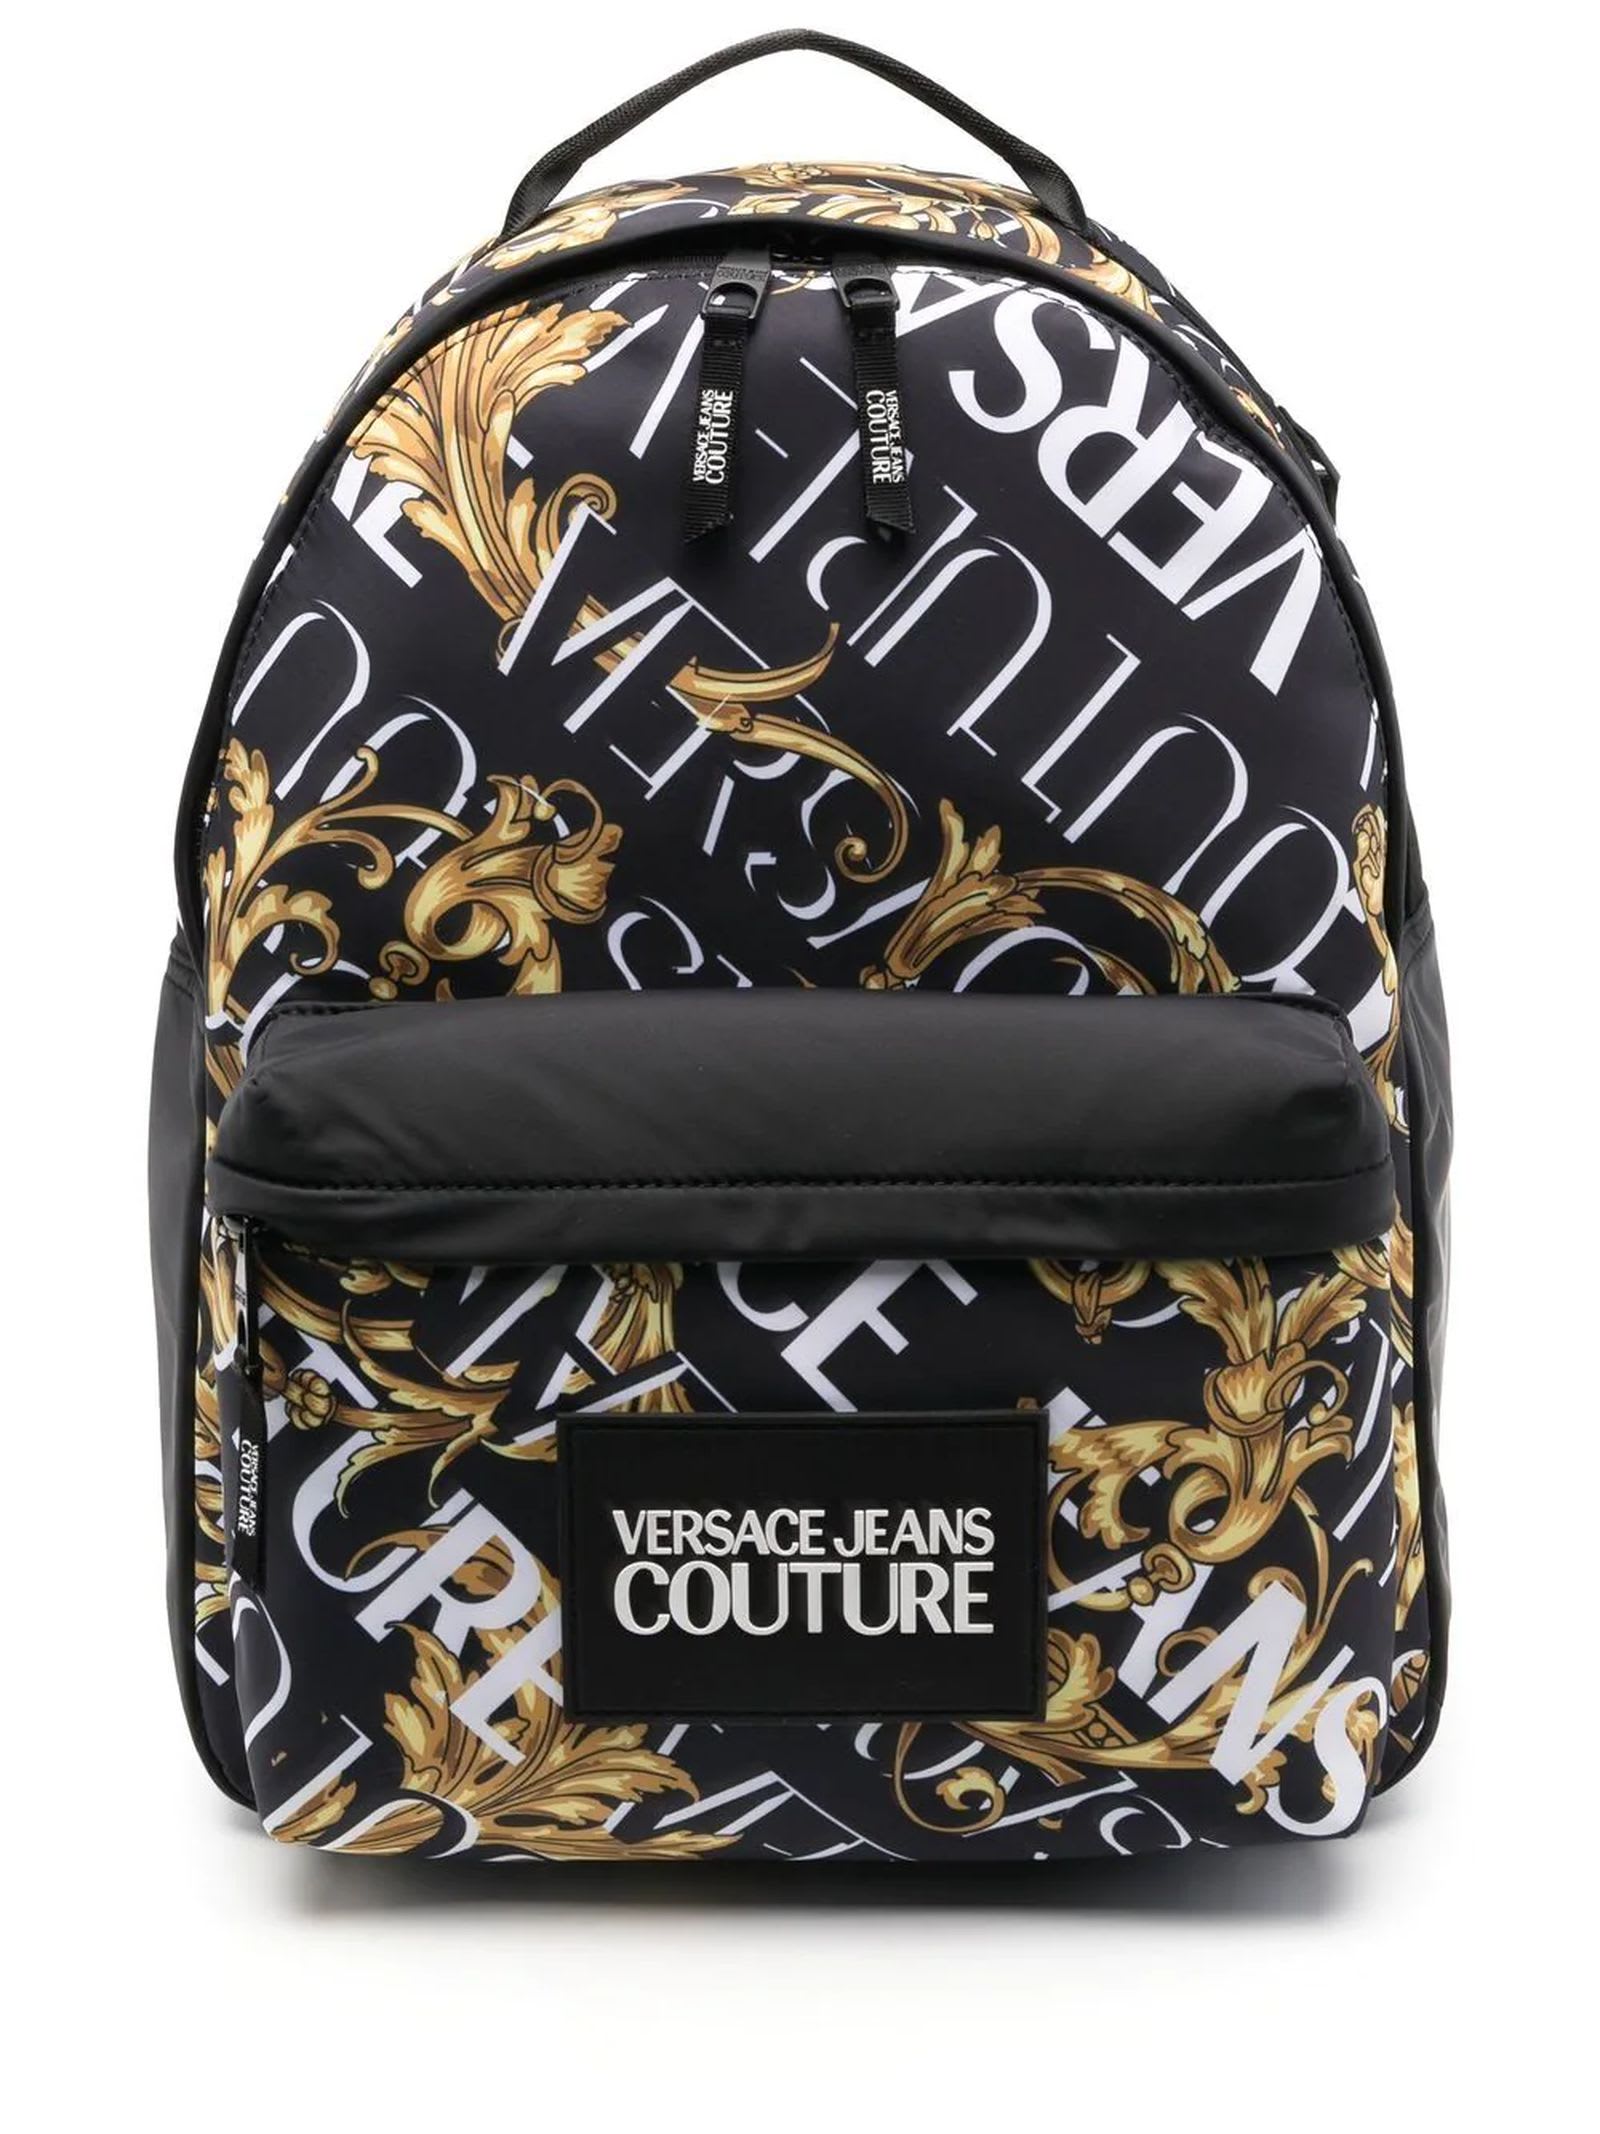 Versace Jeans Couture Black Barocco-logo Print Backpack